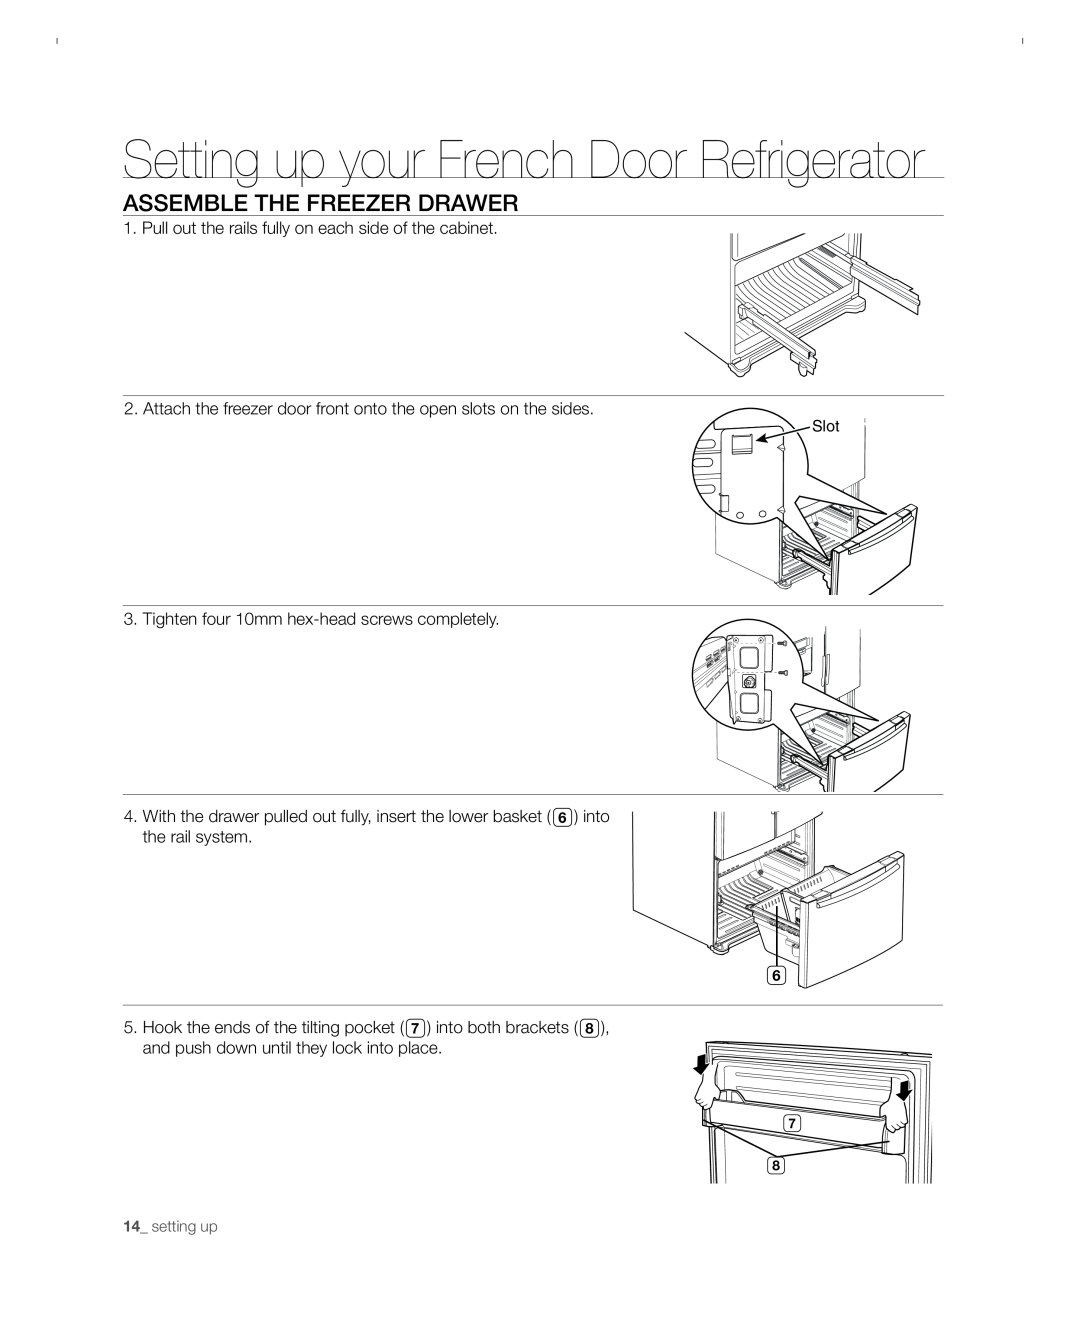 Samsung RFG297ACBP user manual assemble the freezer drawer, Setting up your French Door Refrigerator 